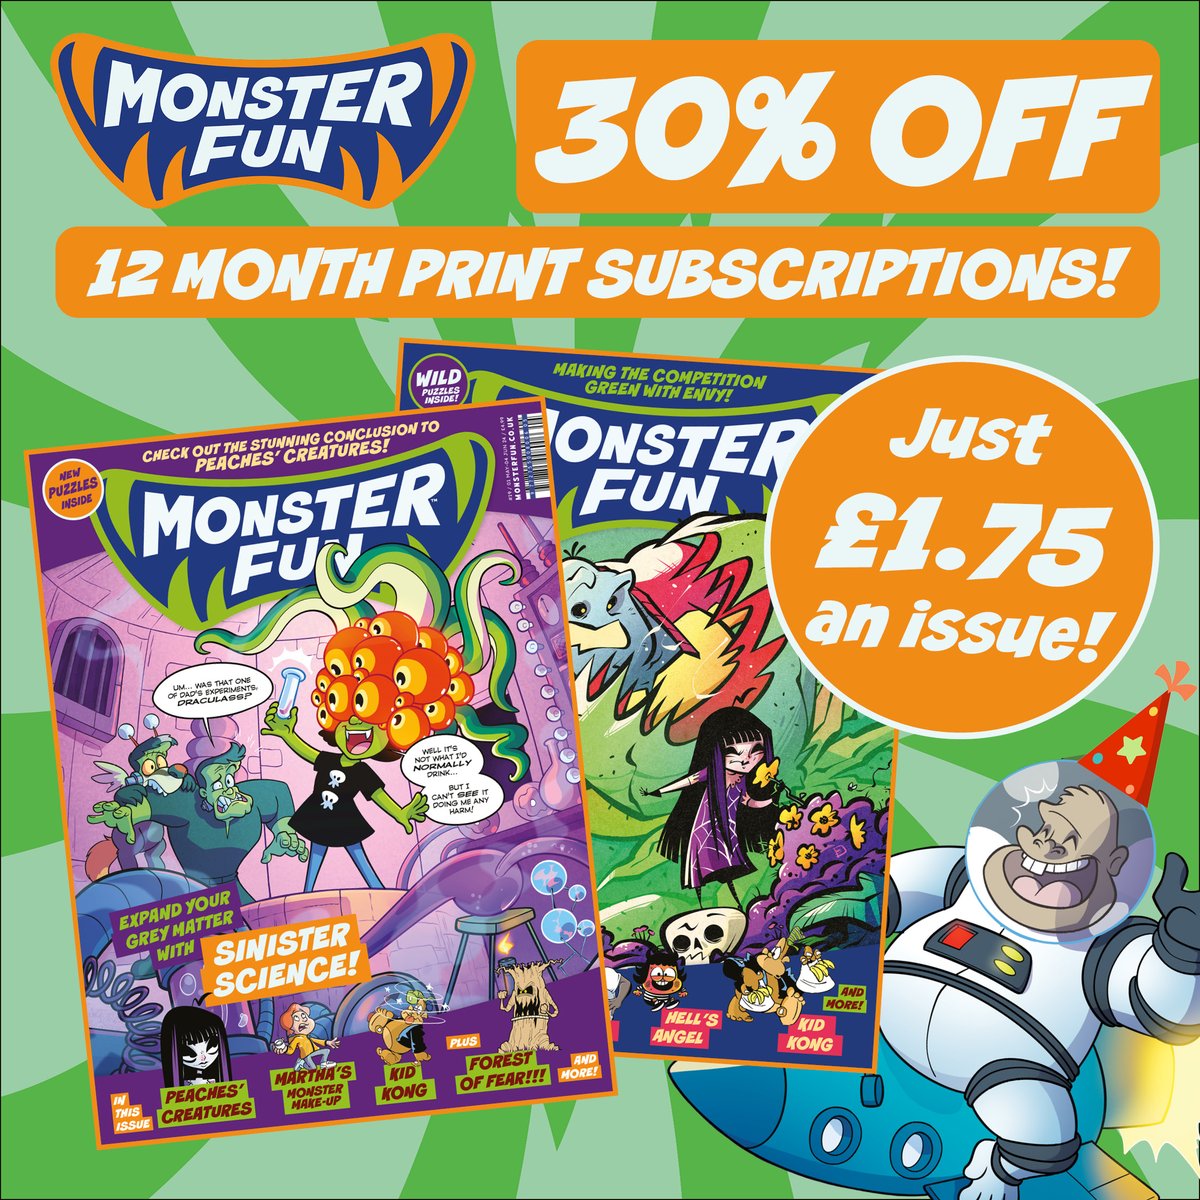 🚨 SPECIAL OFFER ALERT! 🚨 There's still time to secure 30% off #MonsterFun for a whole year! Get 12 issues of our brilliant #comic for just £21! Must end VERY SOON! Subscribe now - before it's too late! 👉 monsterfun.co.uk/SubscribeApril…